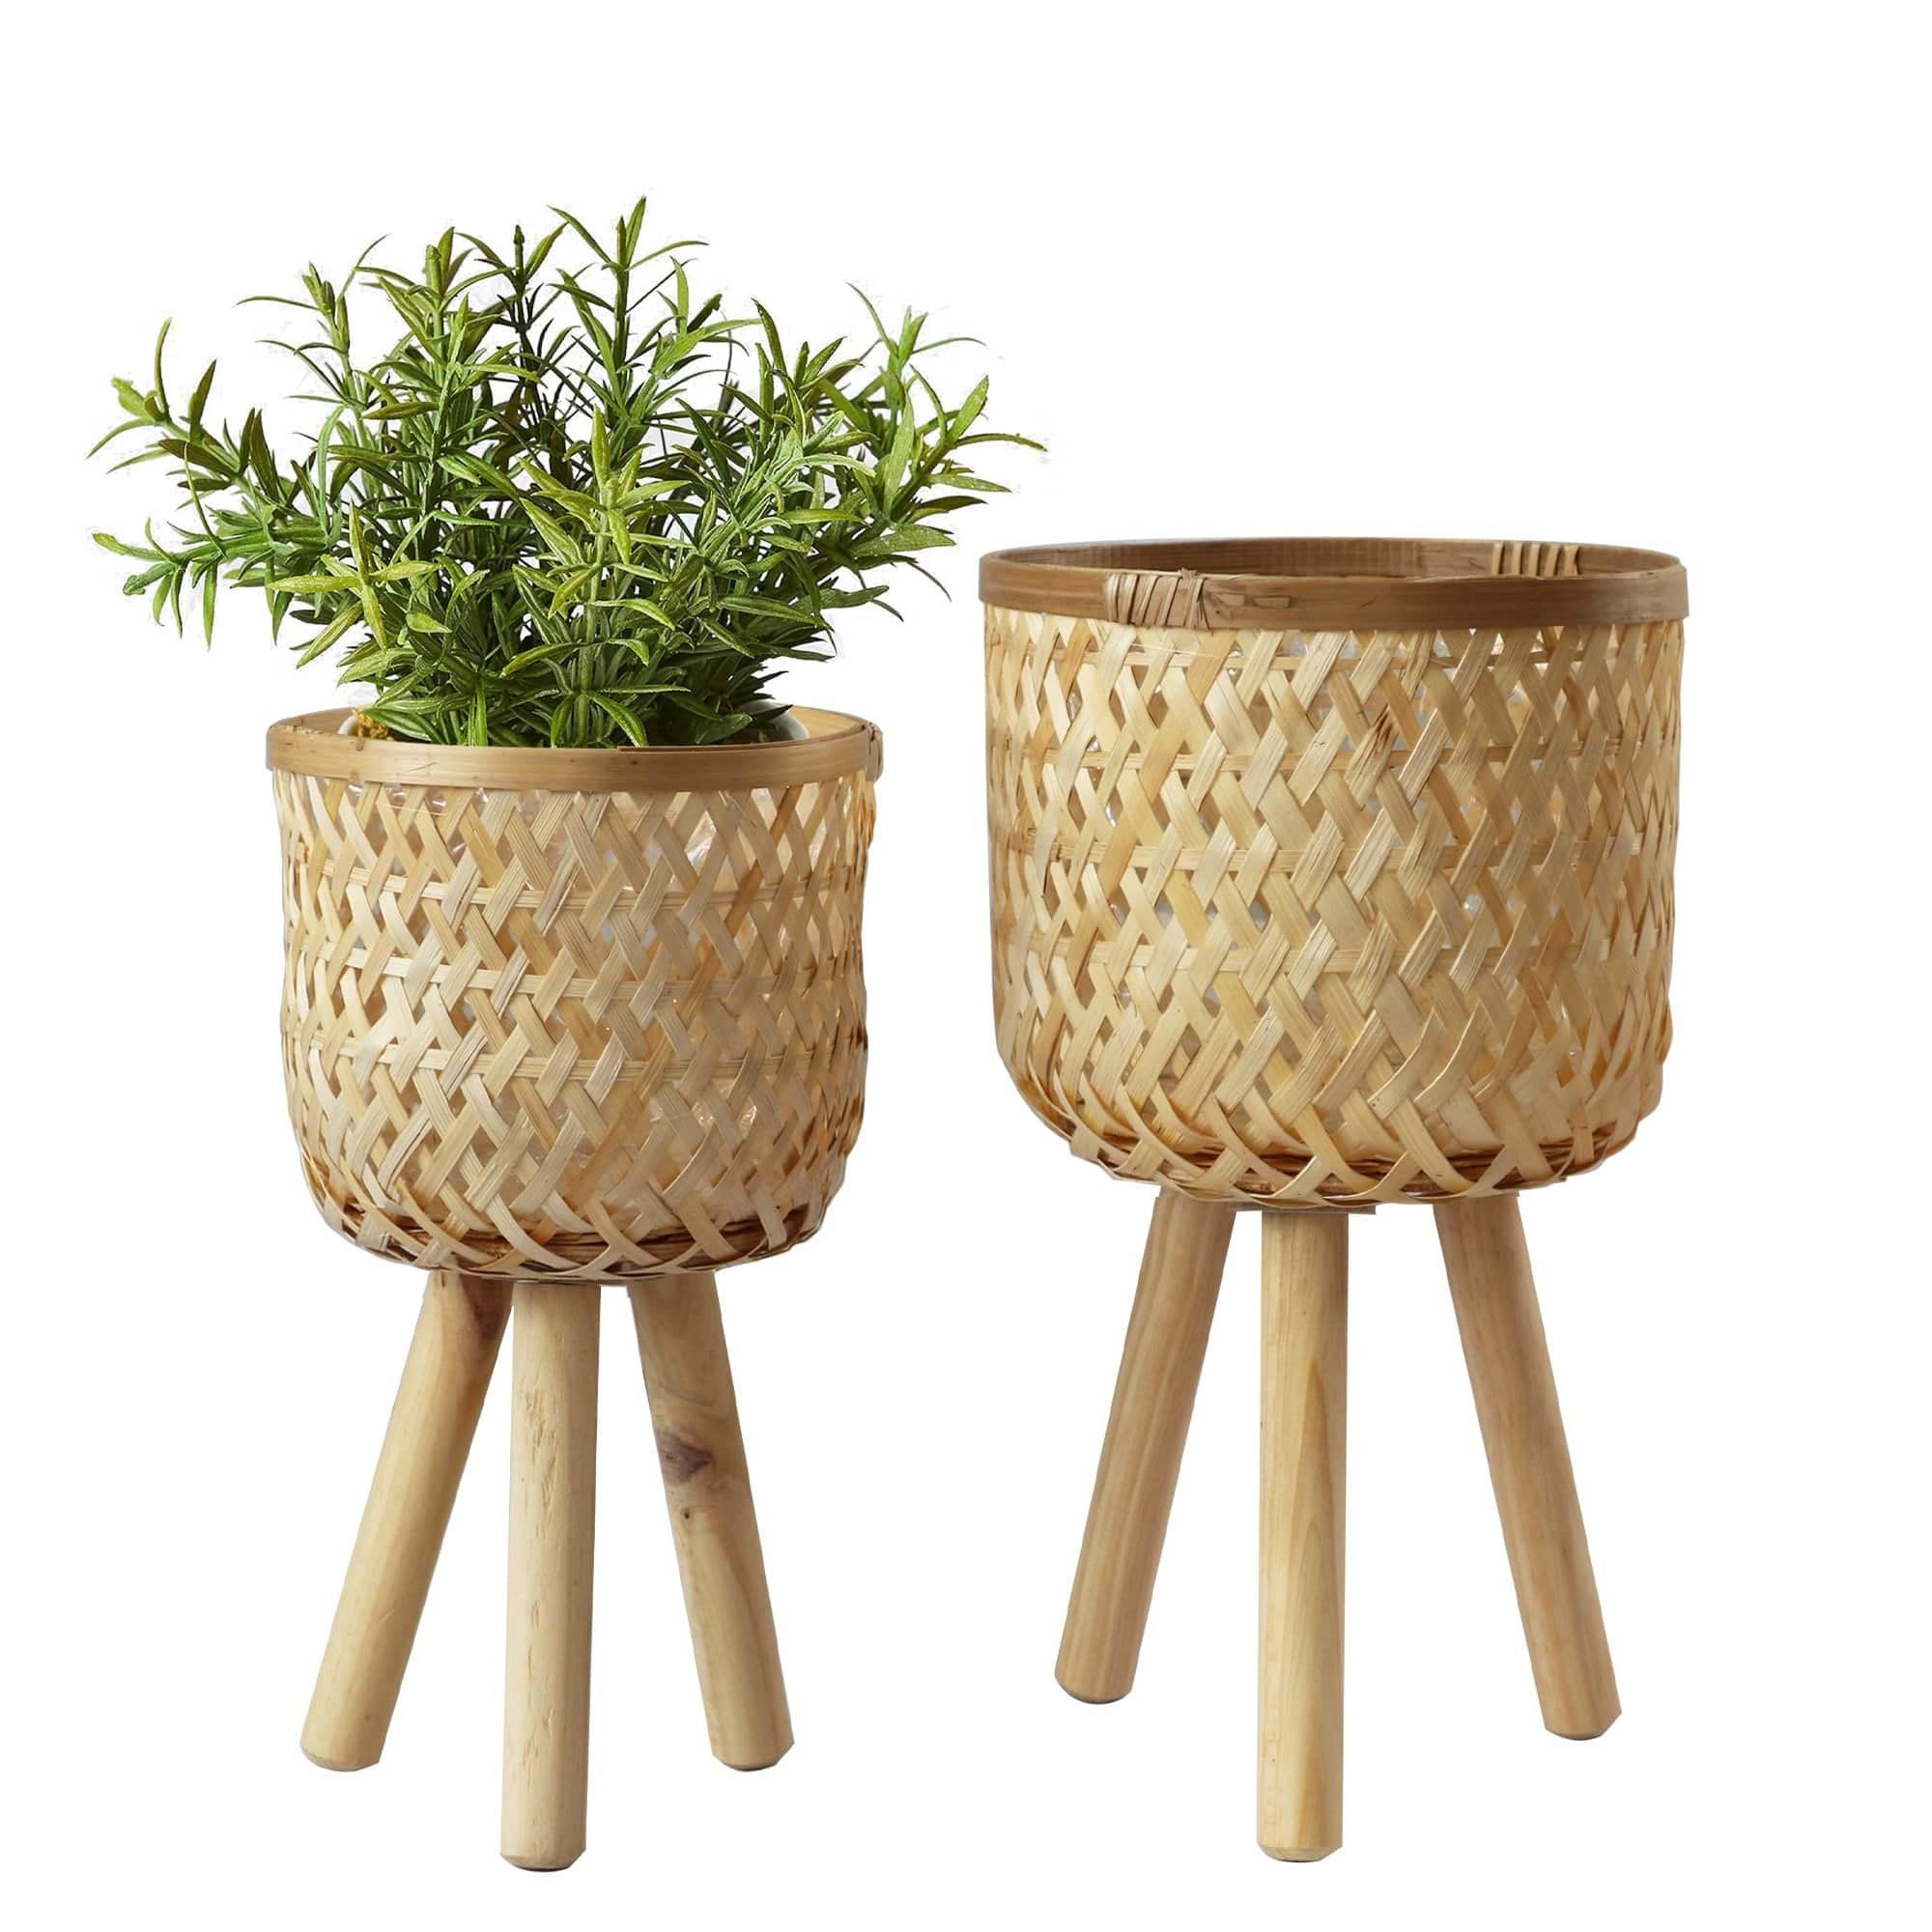 Bobasndm Indoor/Outdoor Wicker Basket with Removable Legs, Woven Planter  Cover for All Weather, Planter Container - Plant Stand